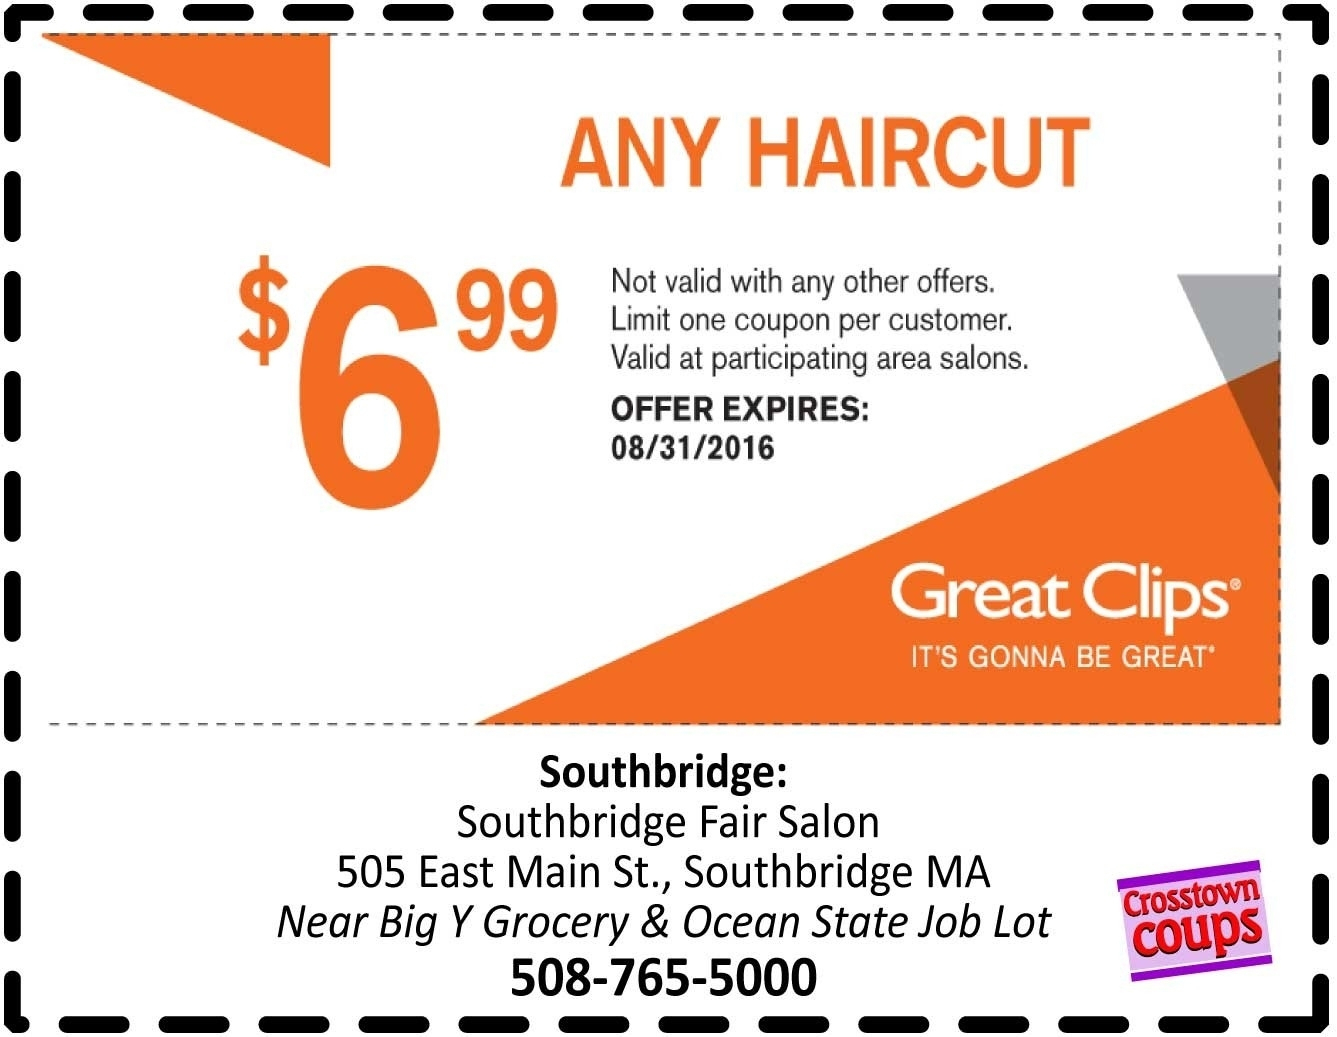 Sport Clips Printable Coupons 2018 | World Of Printable And Chart - Great Clips Free Coupons Printable